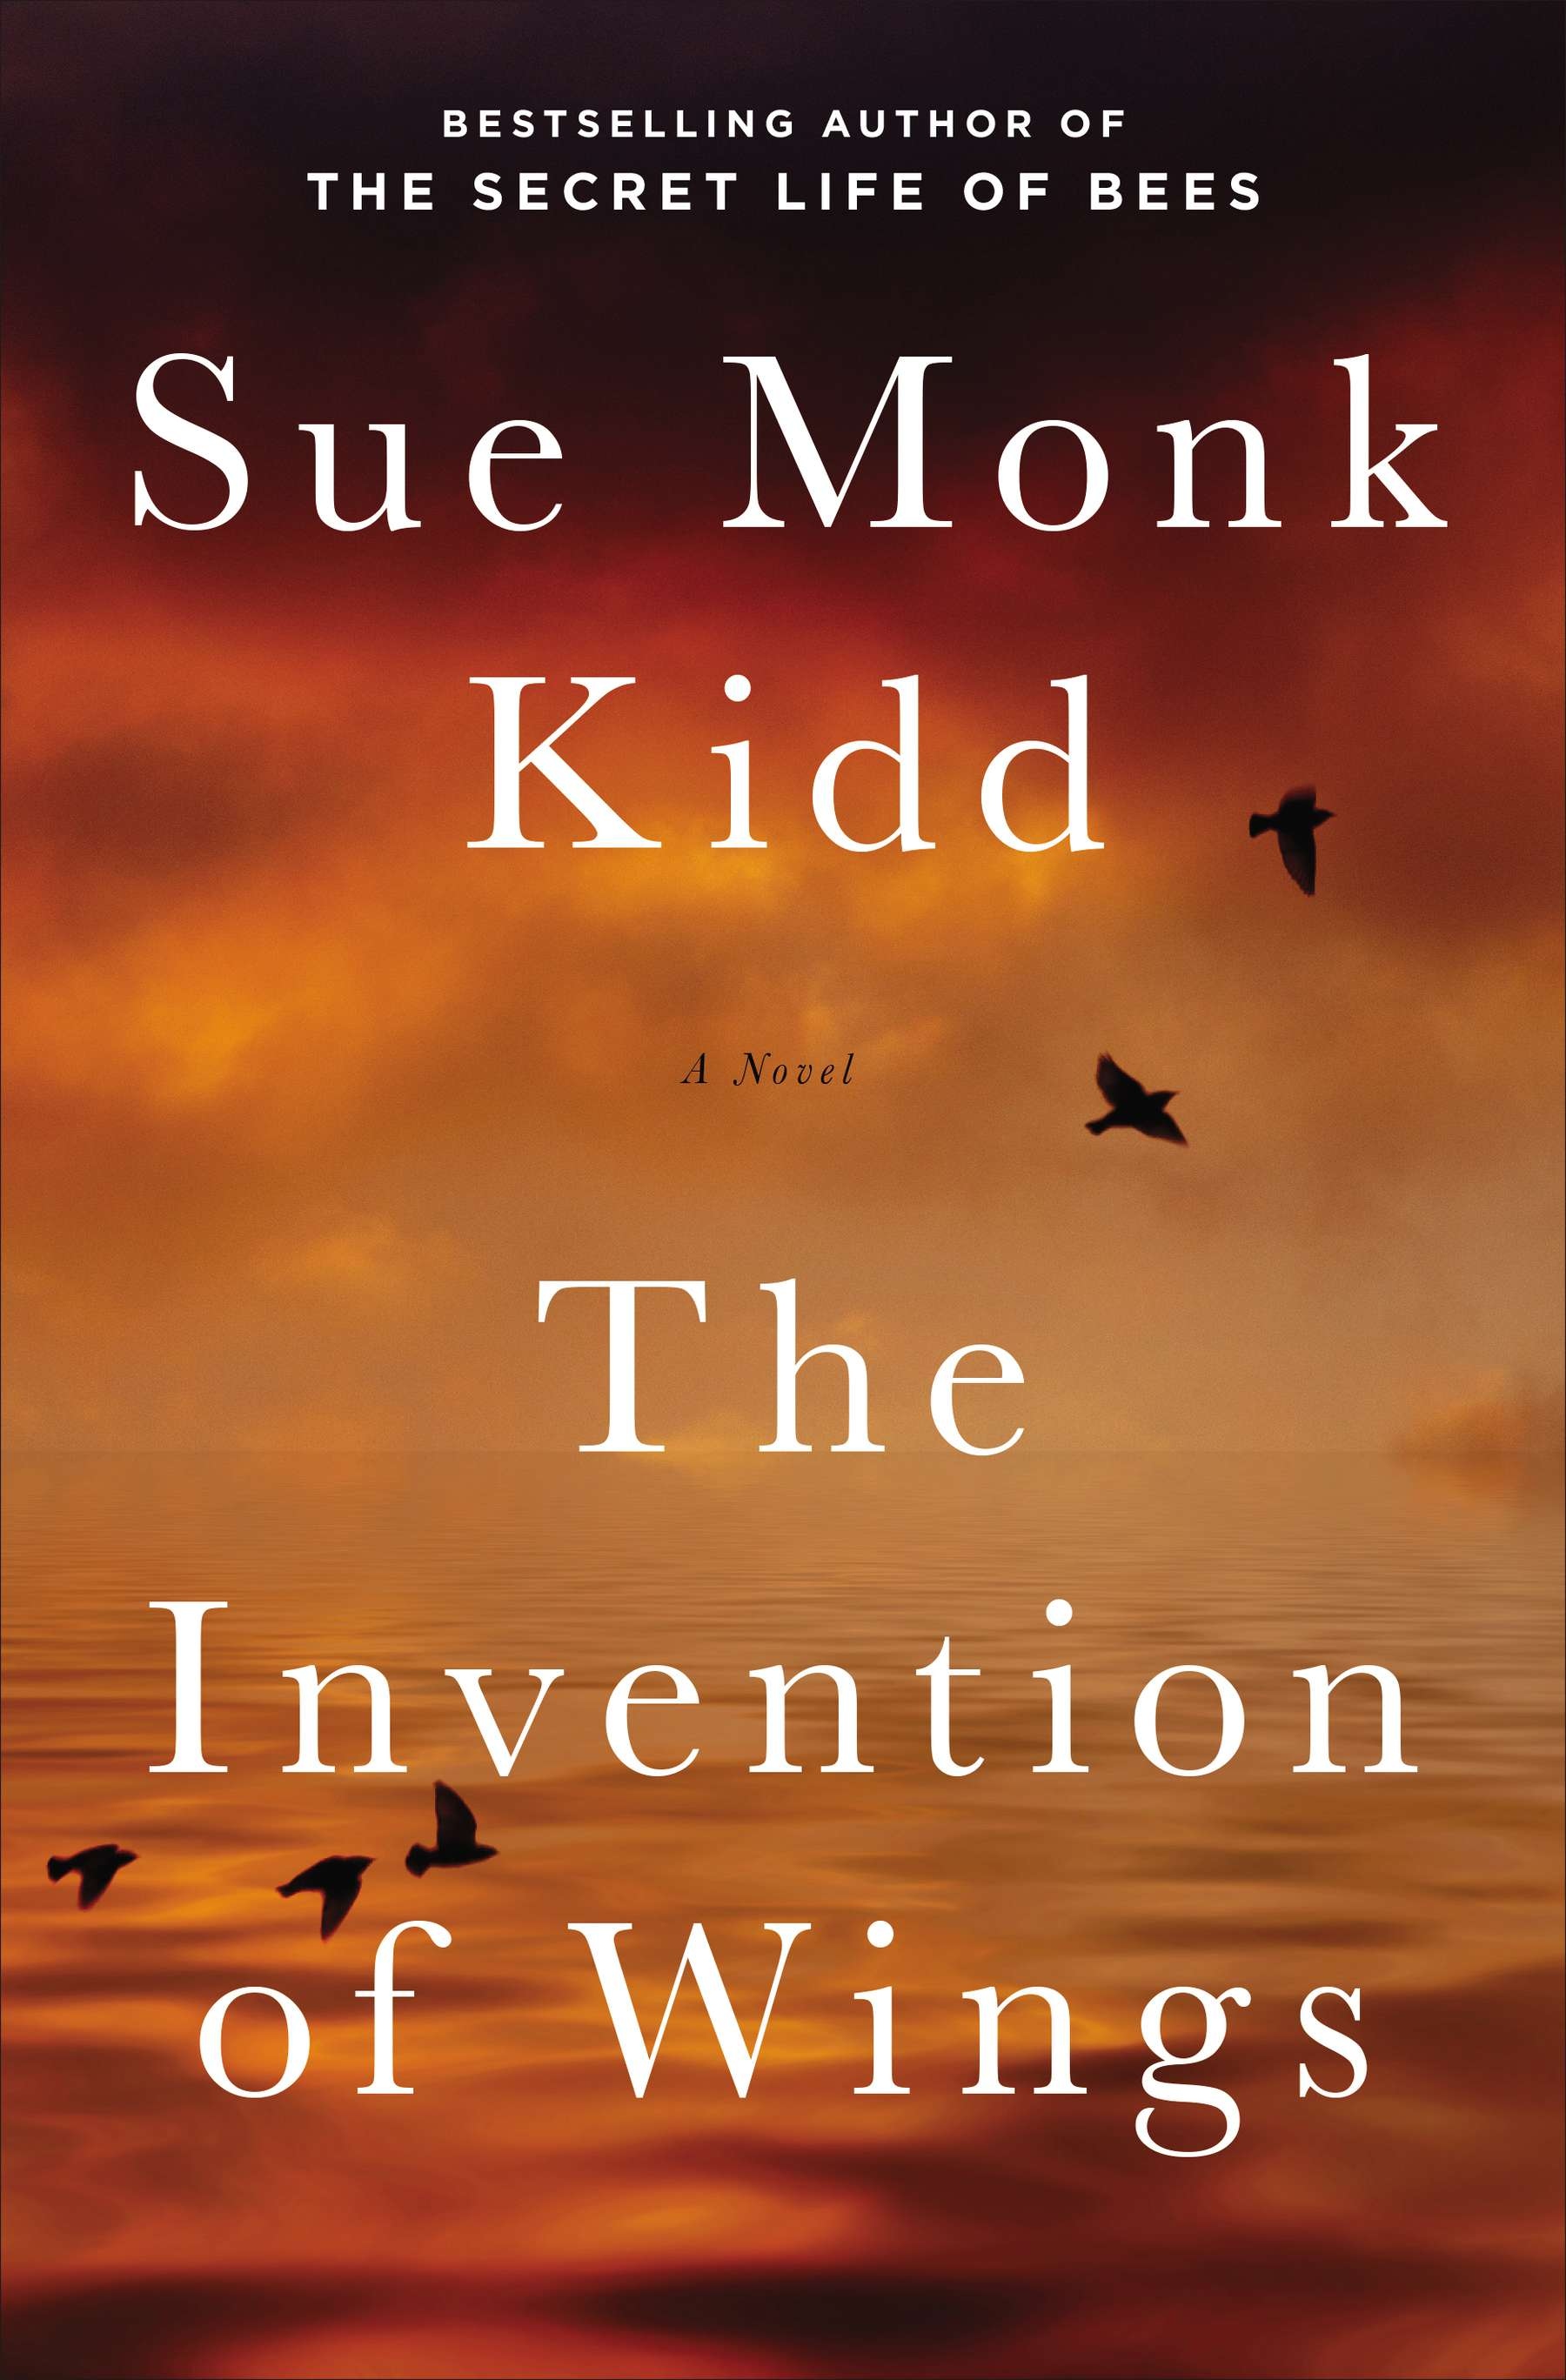 “The Invention of Wings” by Sue Monk Kidd absolutely soars!